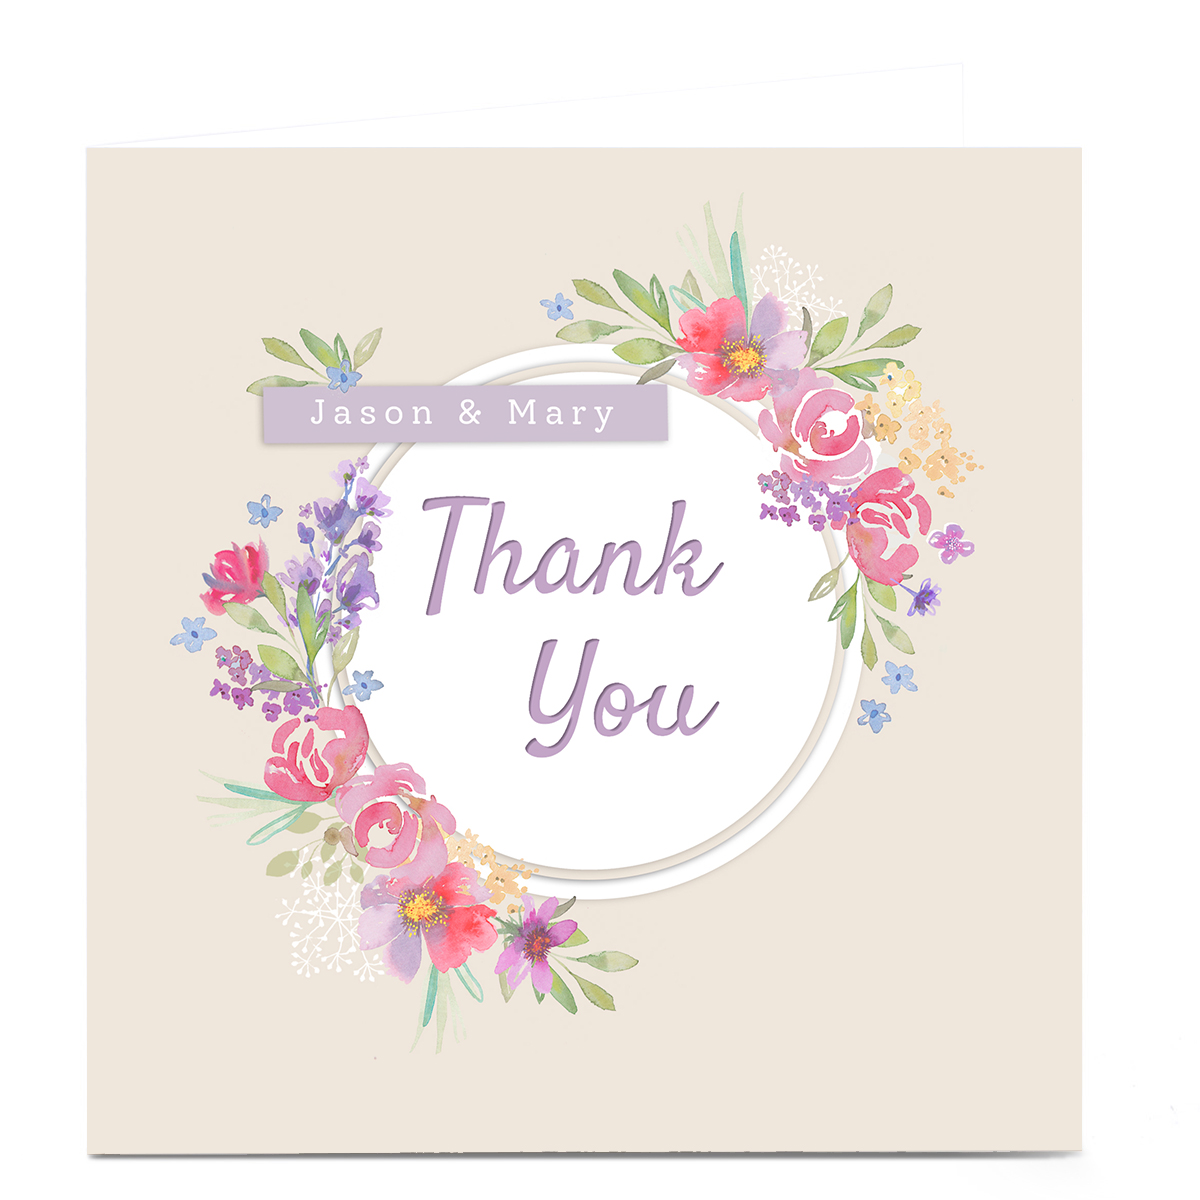 Personalised Kerry Spurling Thank You Card - Floral Frame